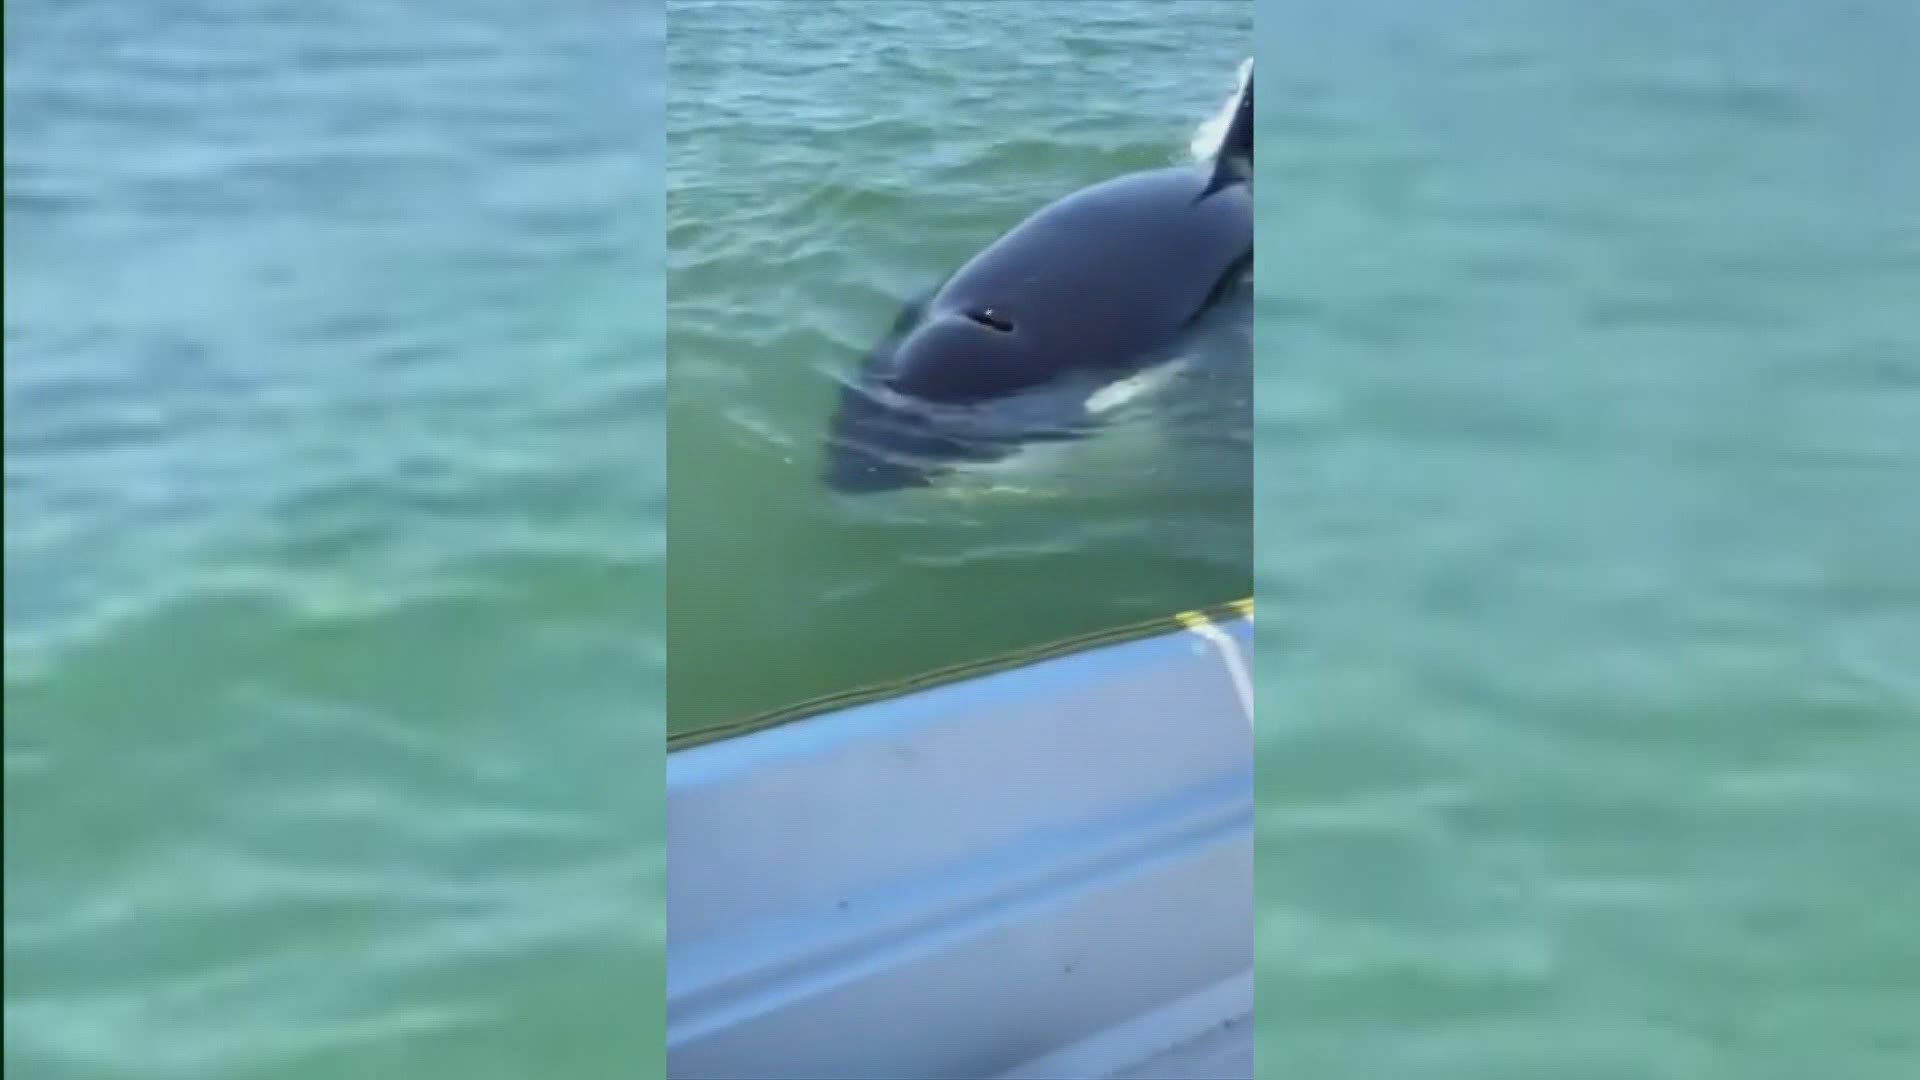 The orca appeared to be "playing" with the family in their boat off Camano Island.